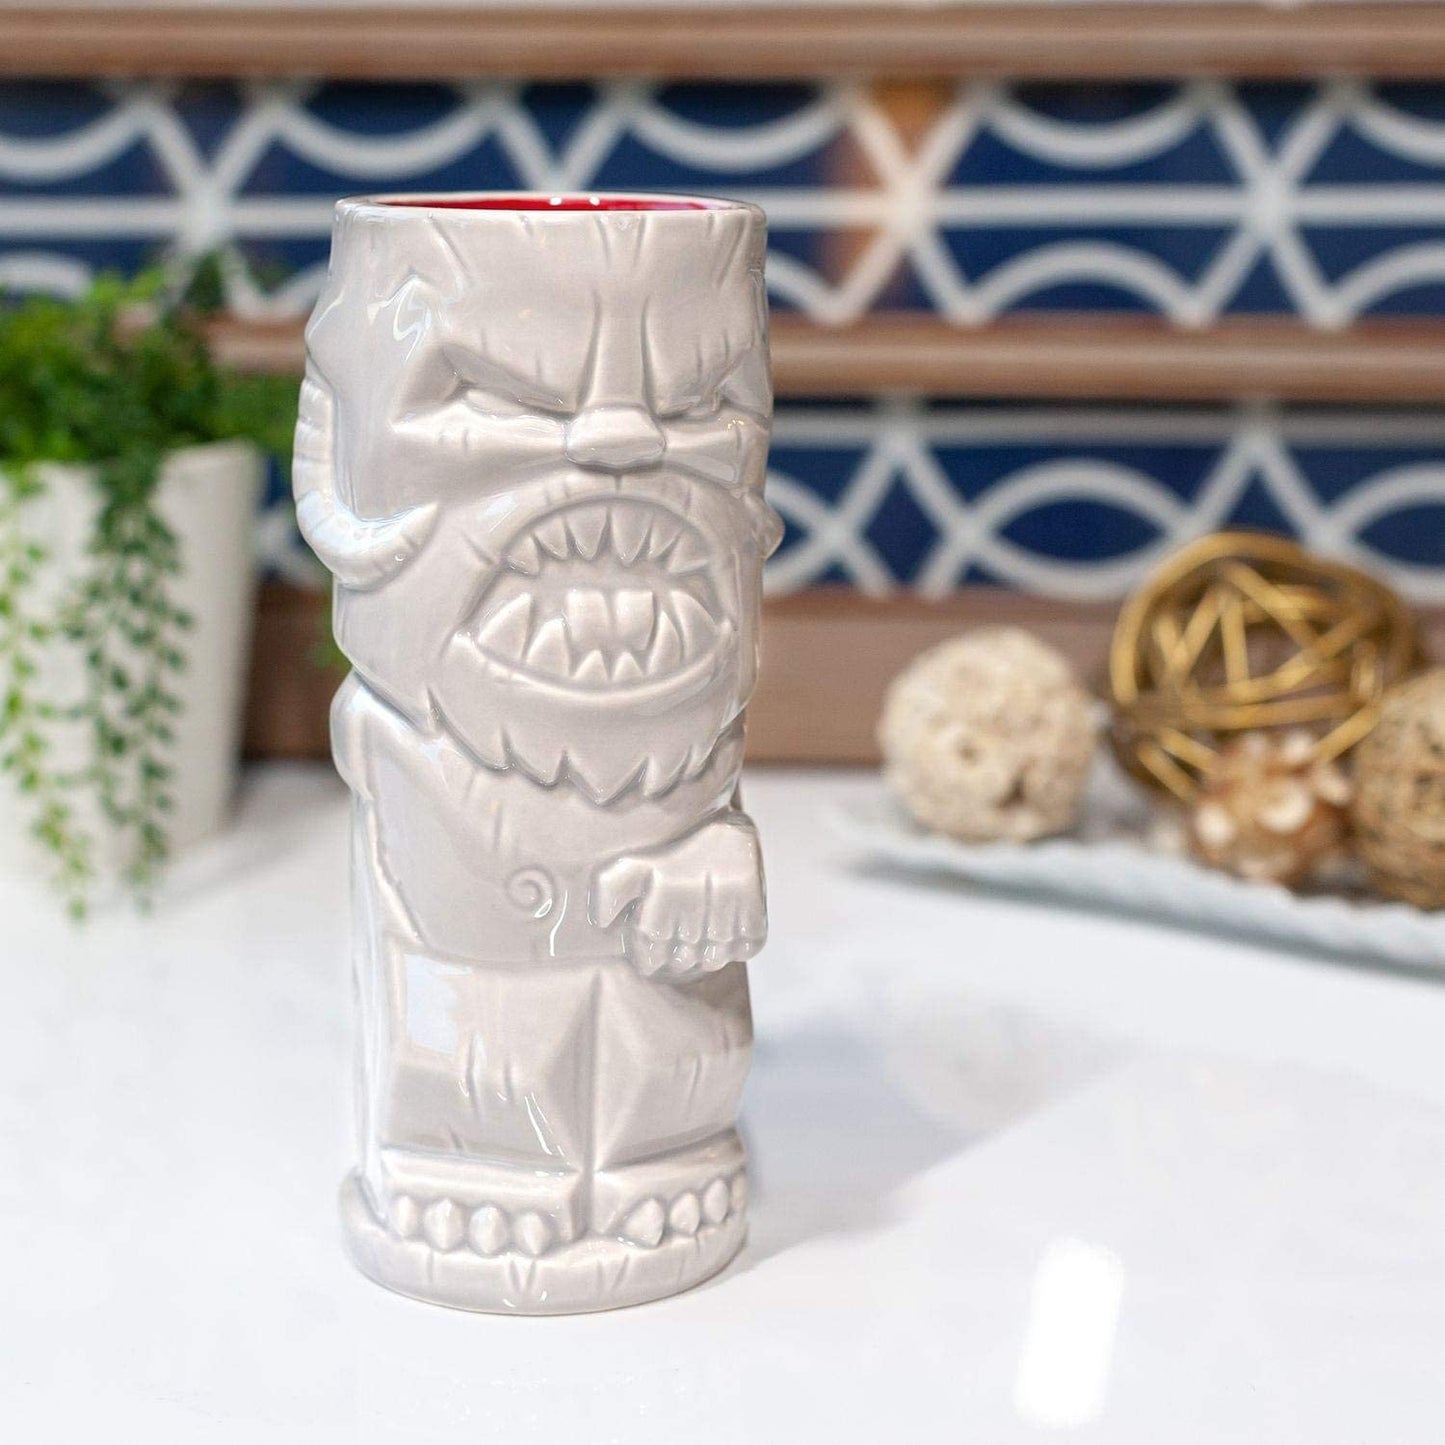 Star Wars Wampa Mug | Official Star Wars Collectible Tiki Style Ceramic Cup | Holds 14 Ounces